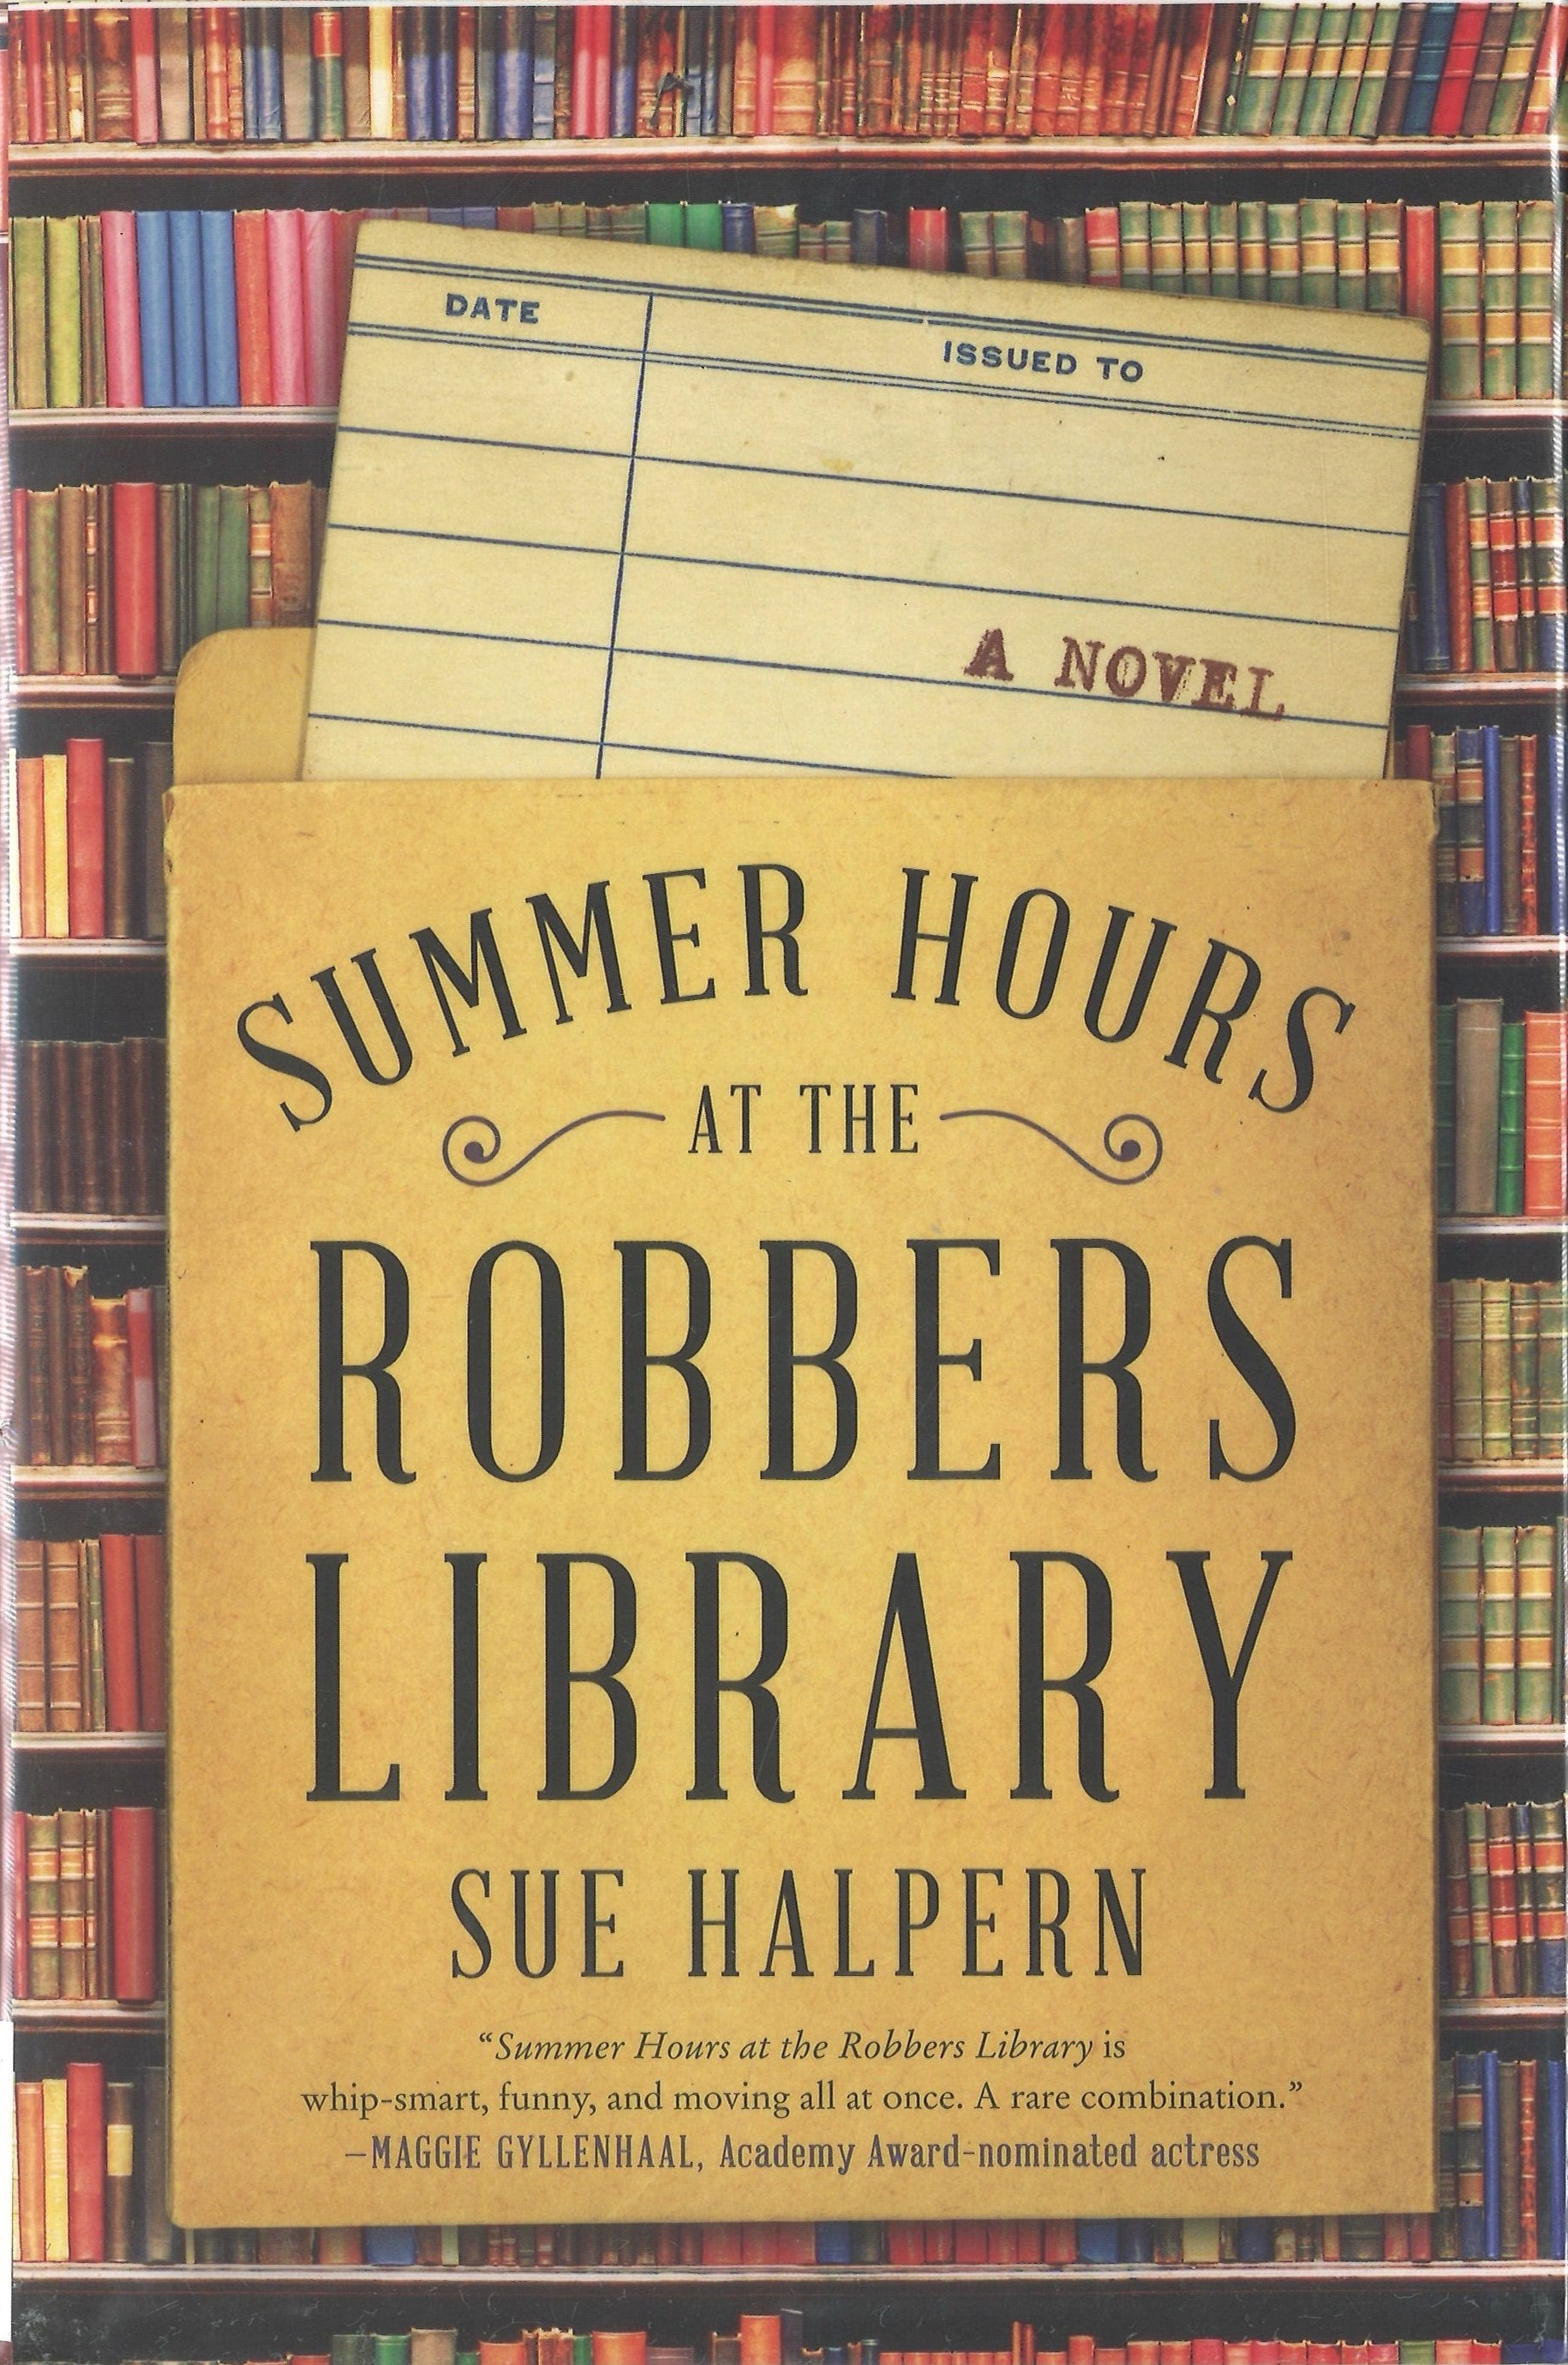 Image for "Summer Hours at the Robbers Library"